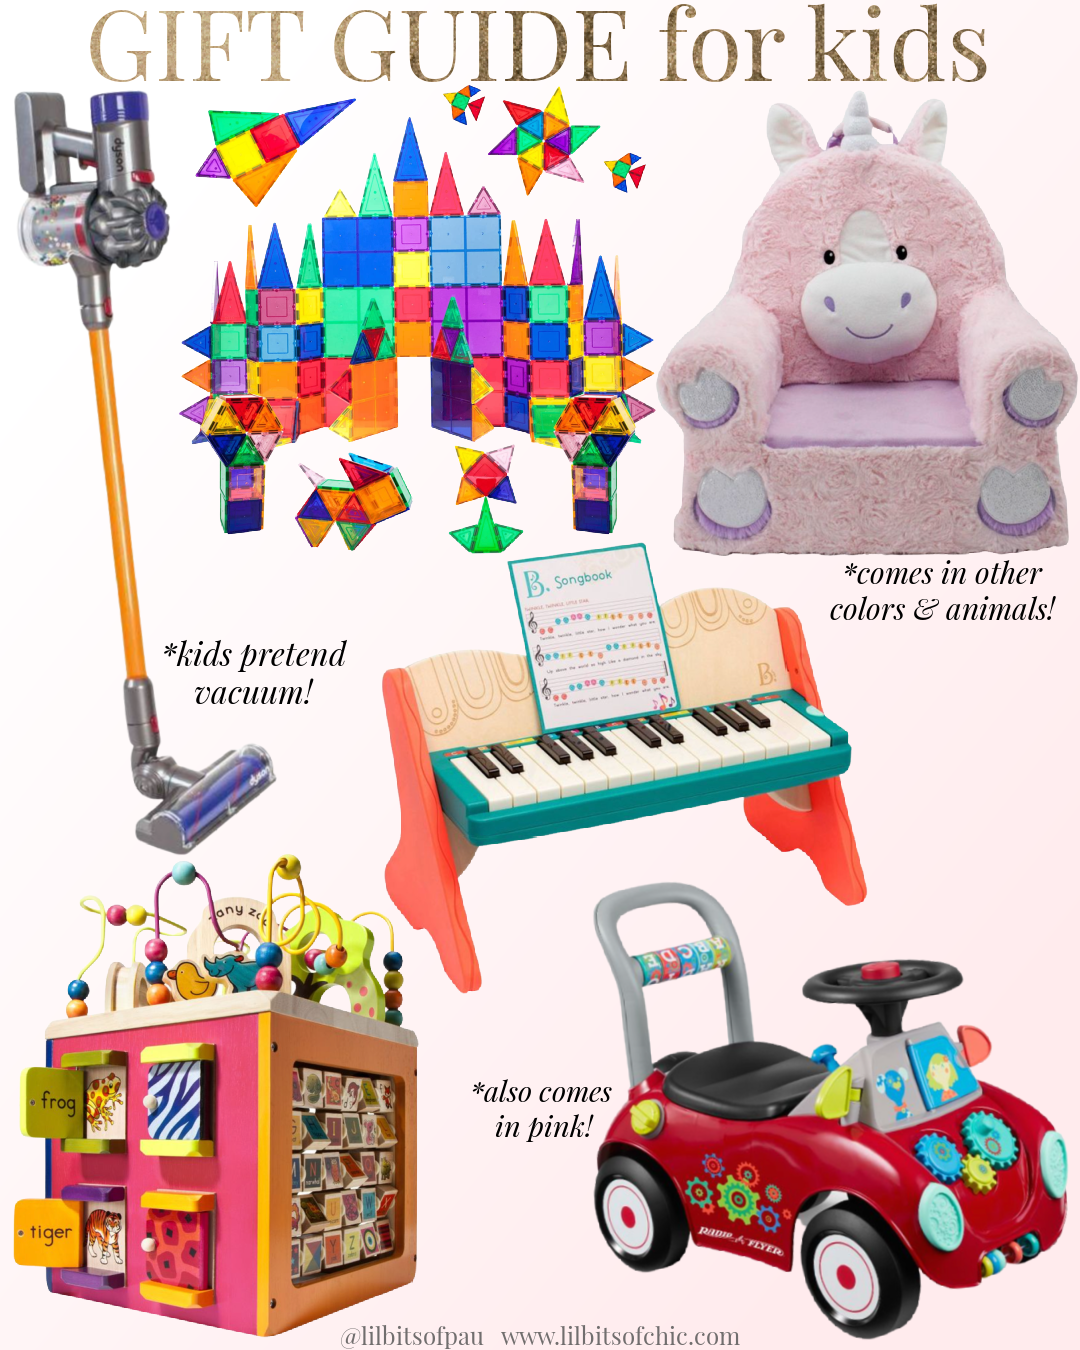 Gift guide for kids, gift guide for young kids, gift ideas for kids